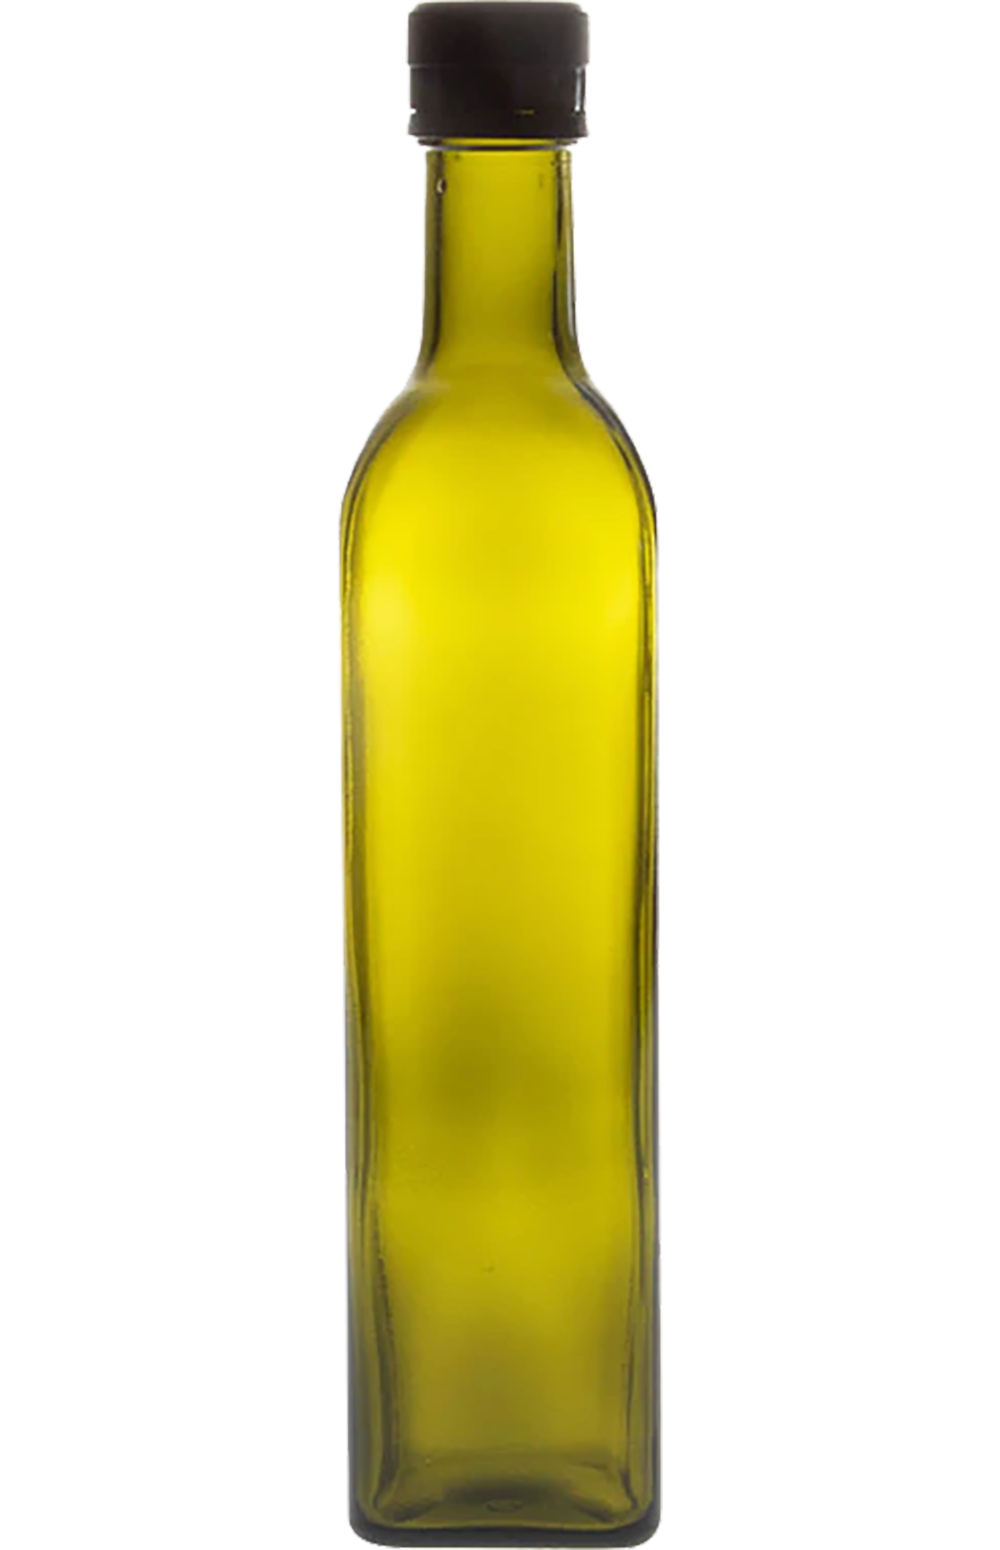 The Rector Extra Virgin Olive Oil